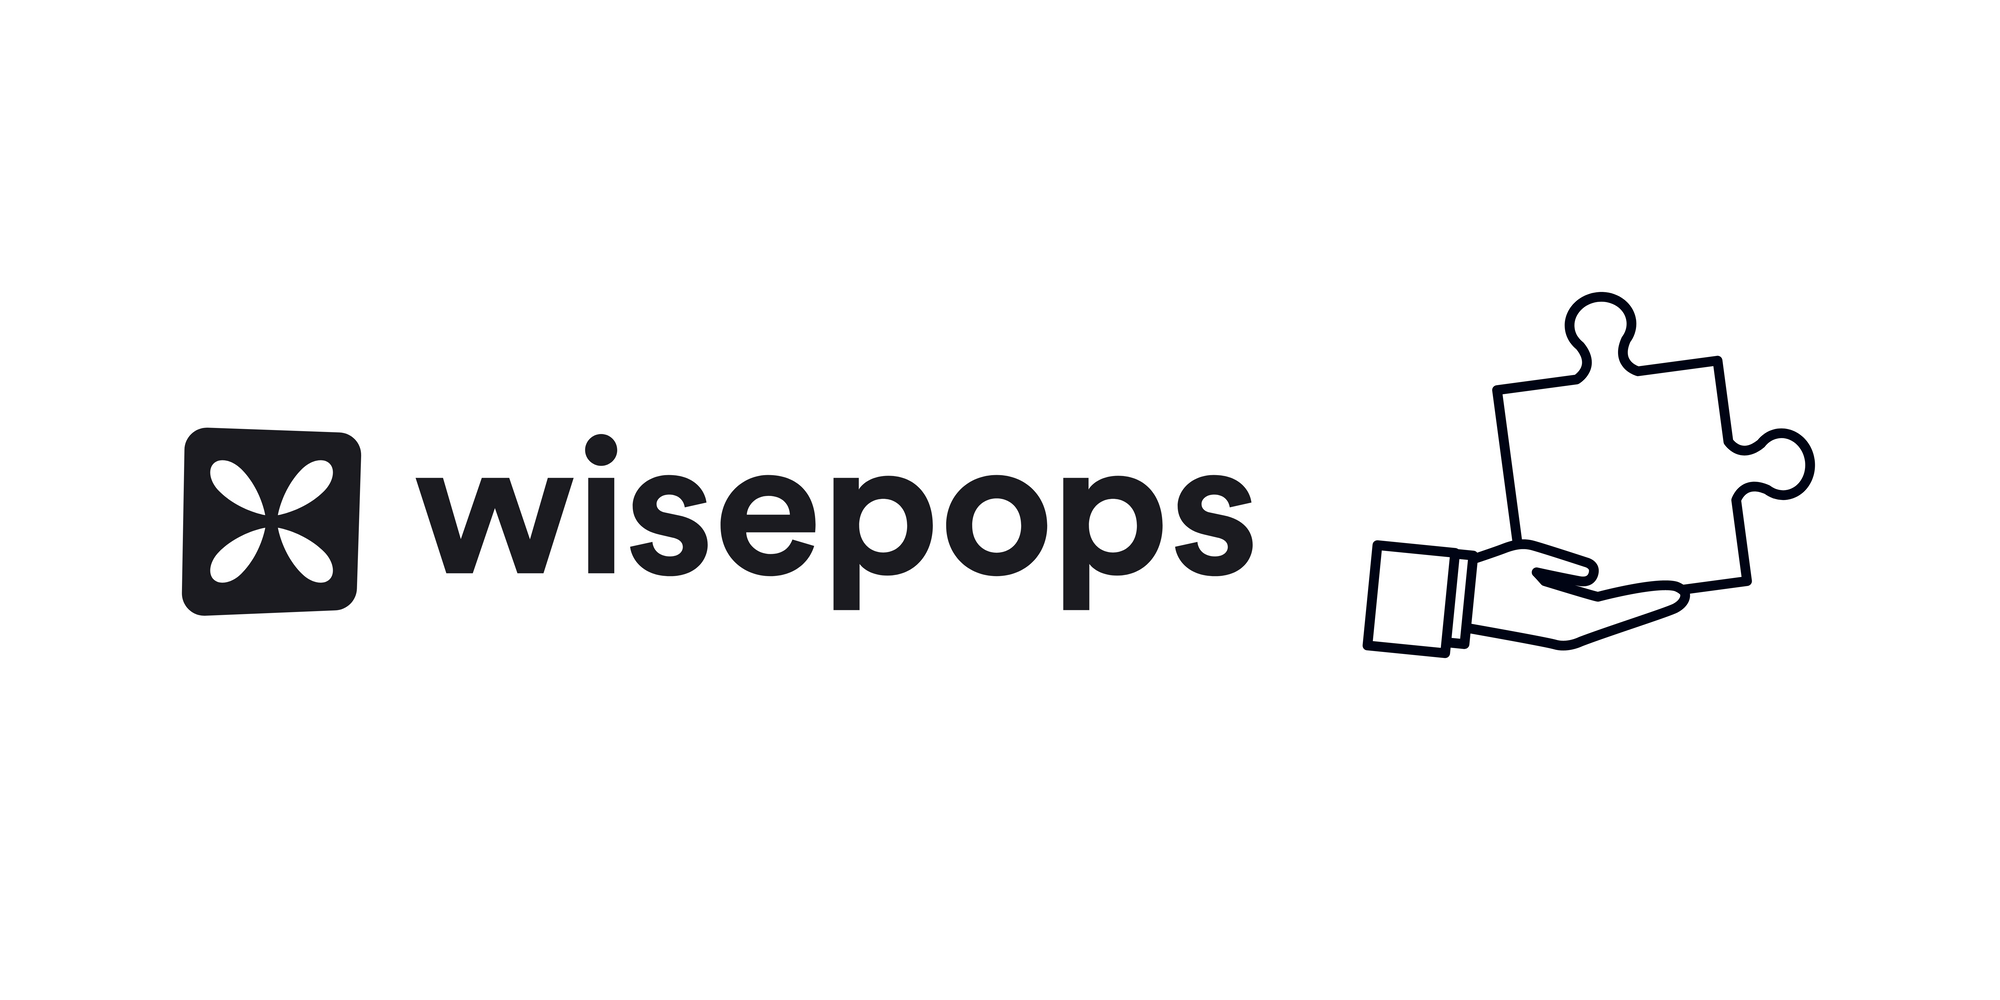 Wisepops icon and a hand holding a jigsaw piece on white background